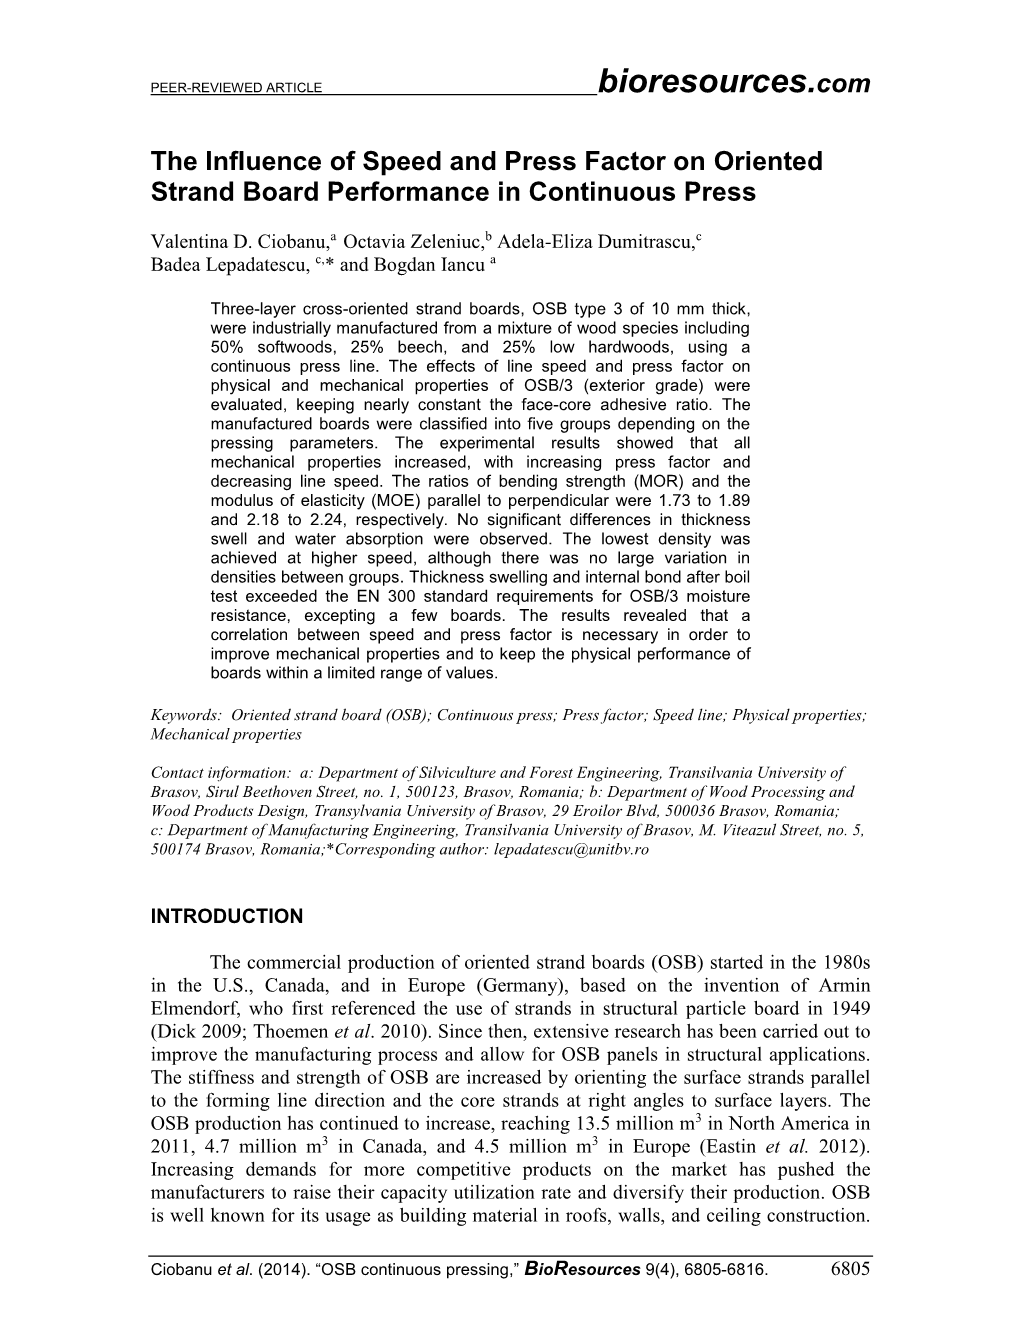 The Influence of Speed and Press Factor on Oriented Strand Board Performance in Continuous Press